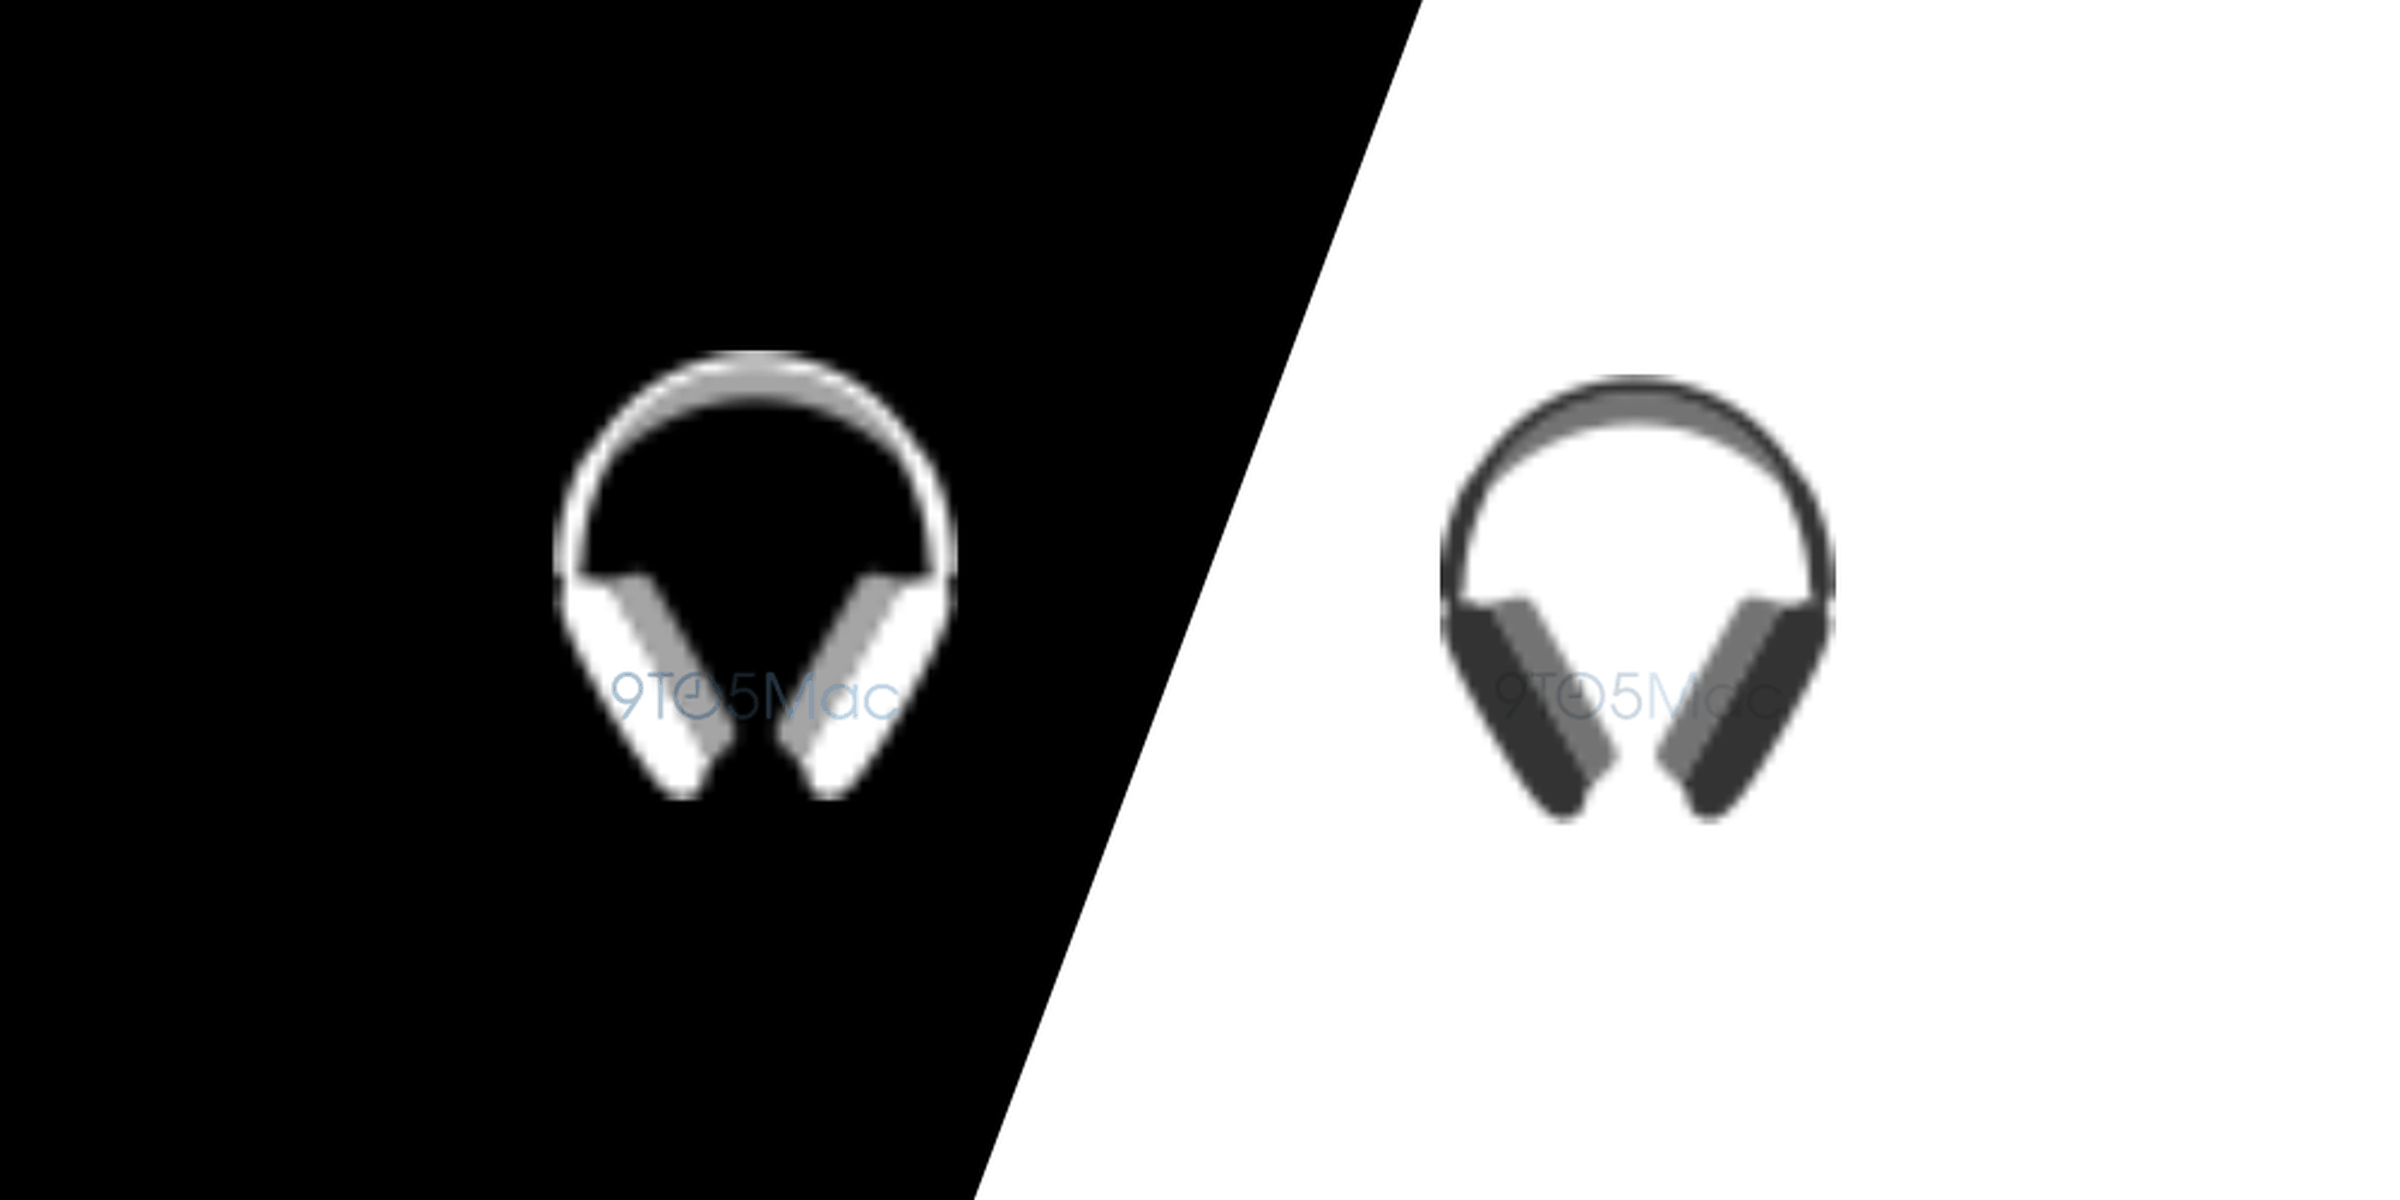 Older icons of the rumored over-ear headphones.